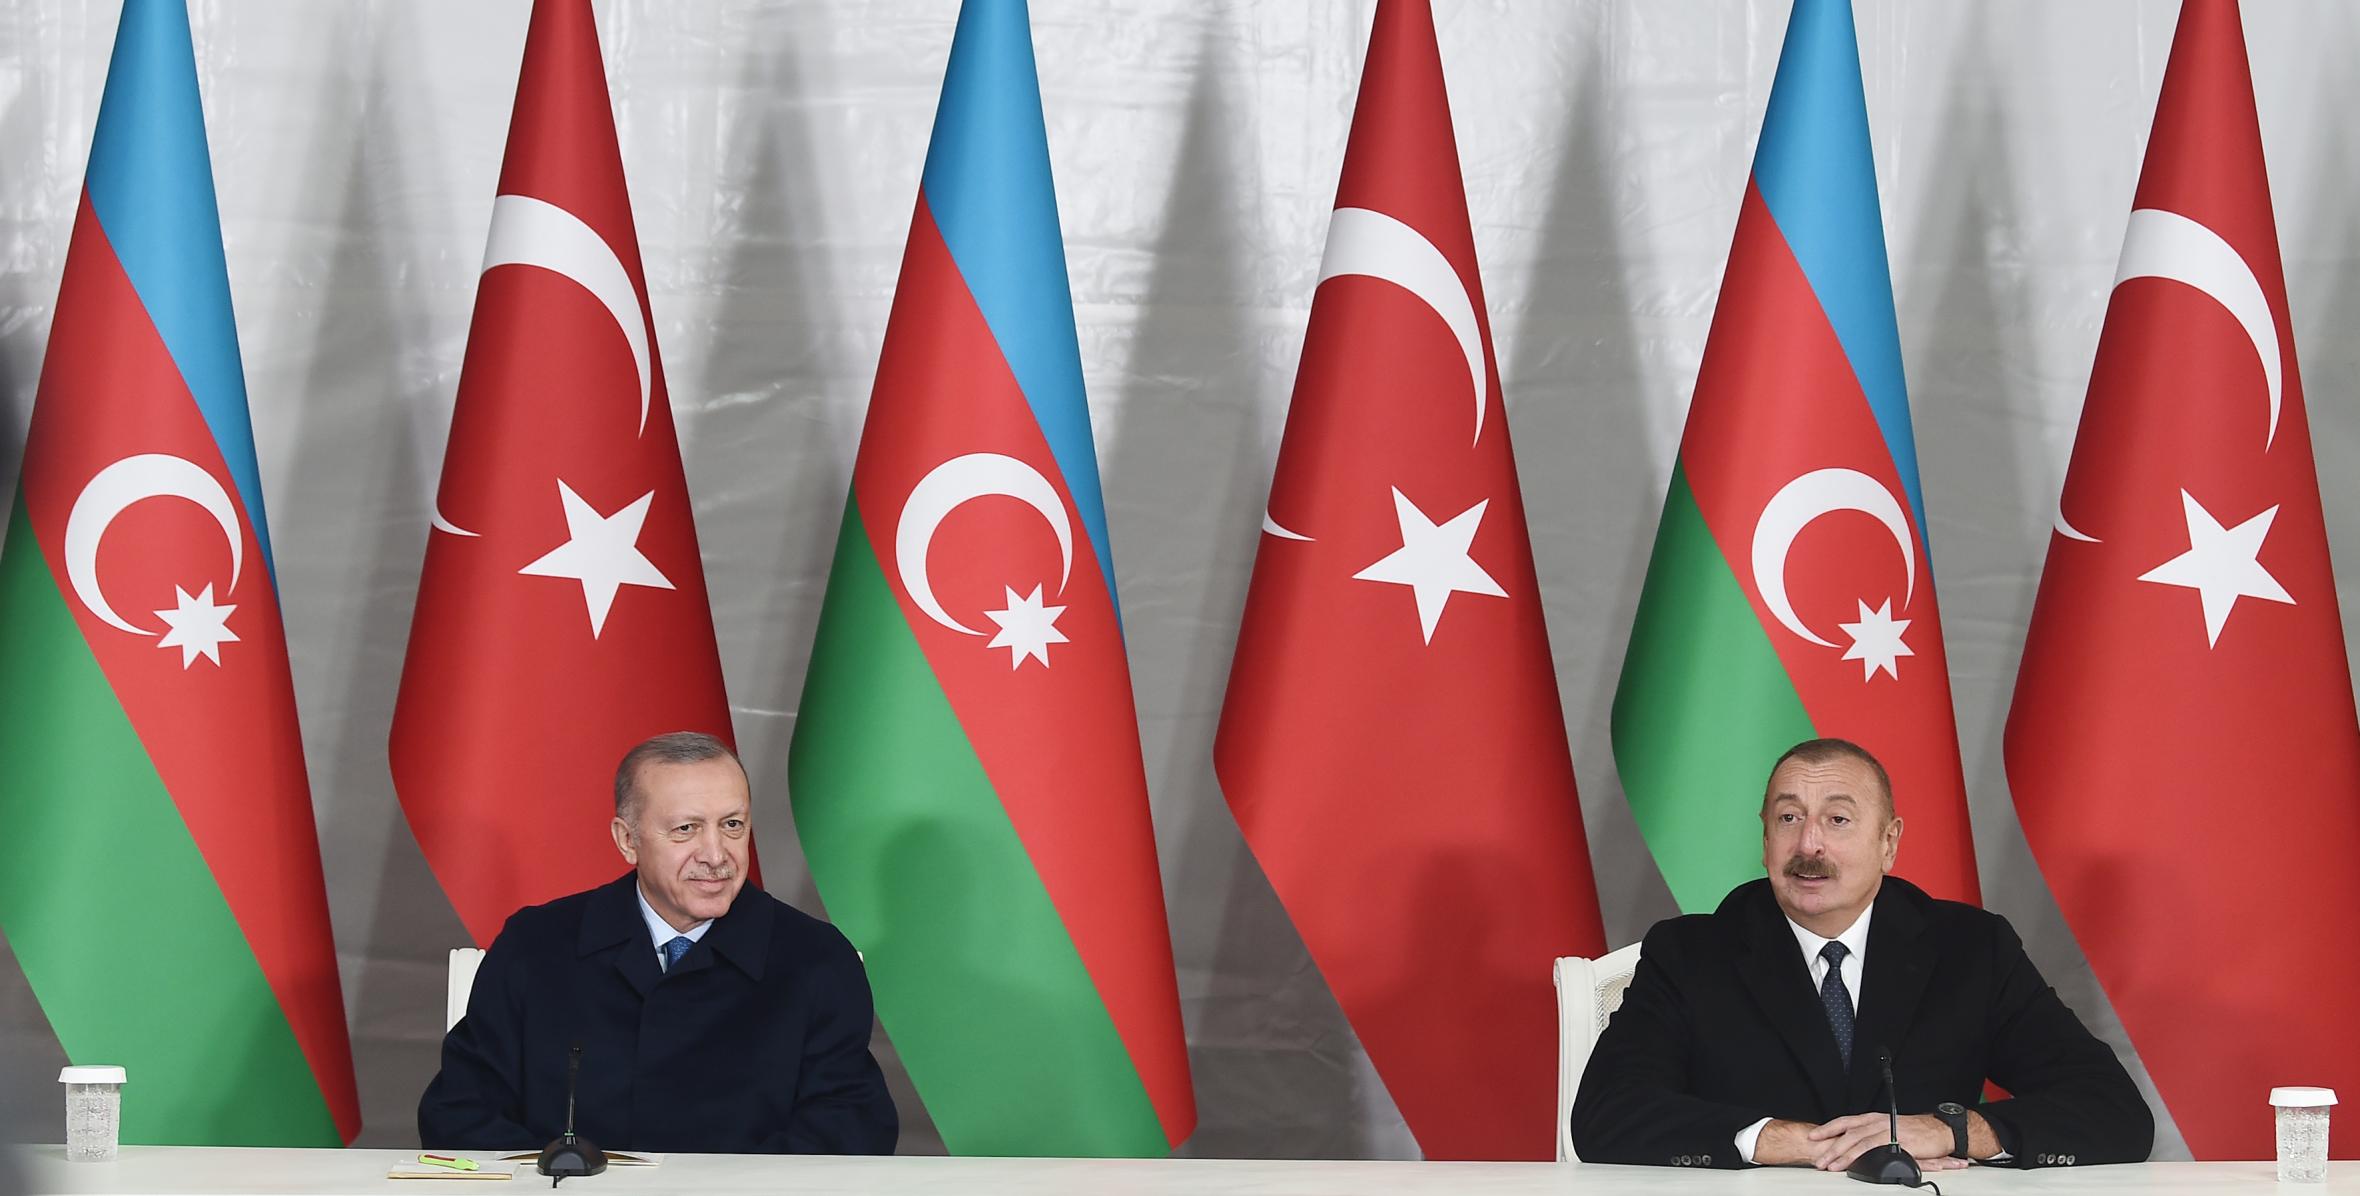 Presidents of Azerbaijan and Turkey made joint press statements